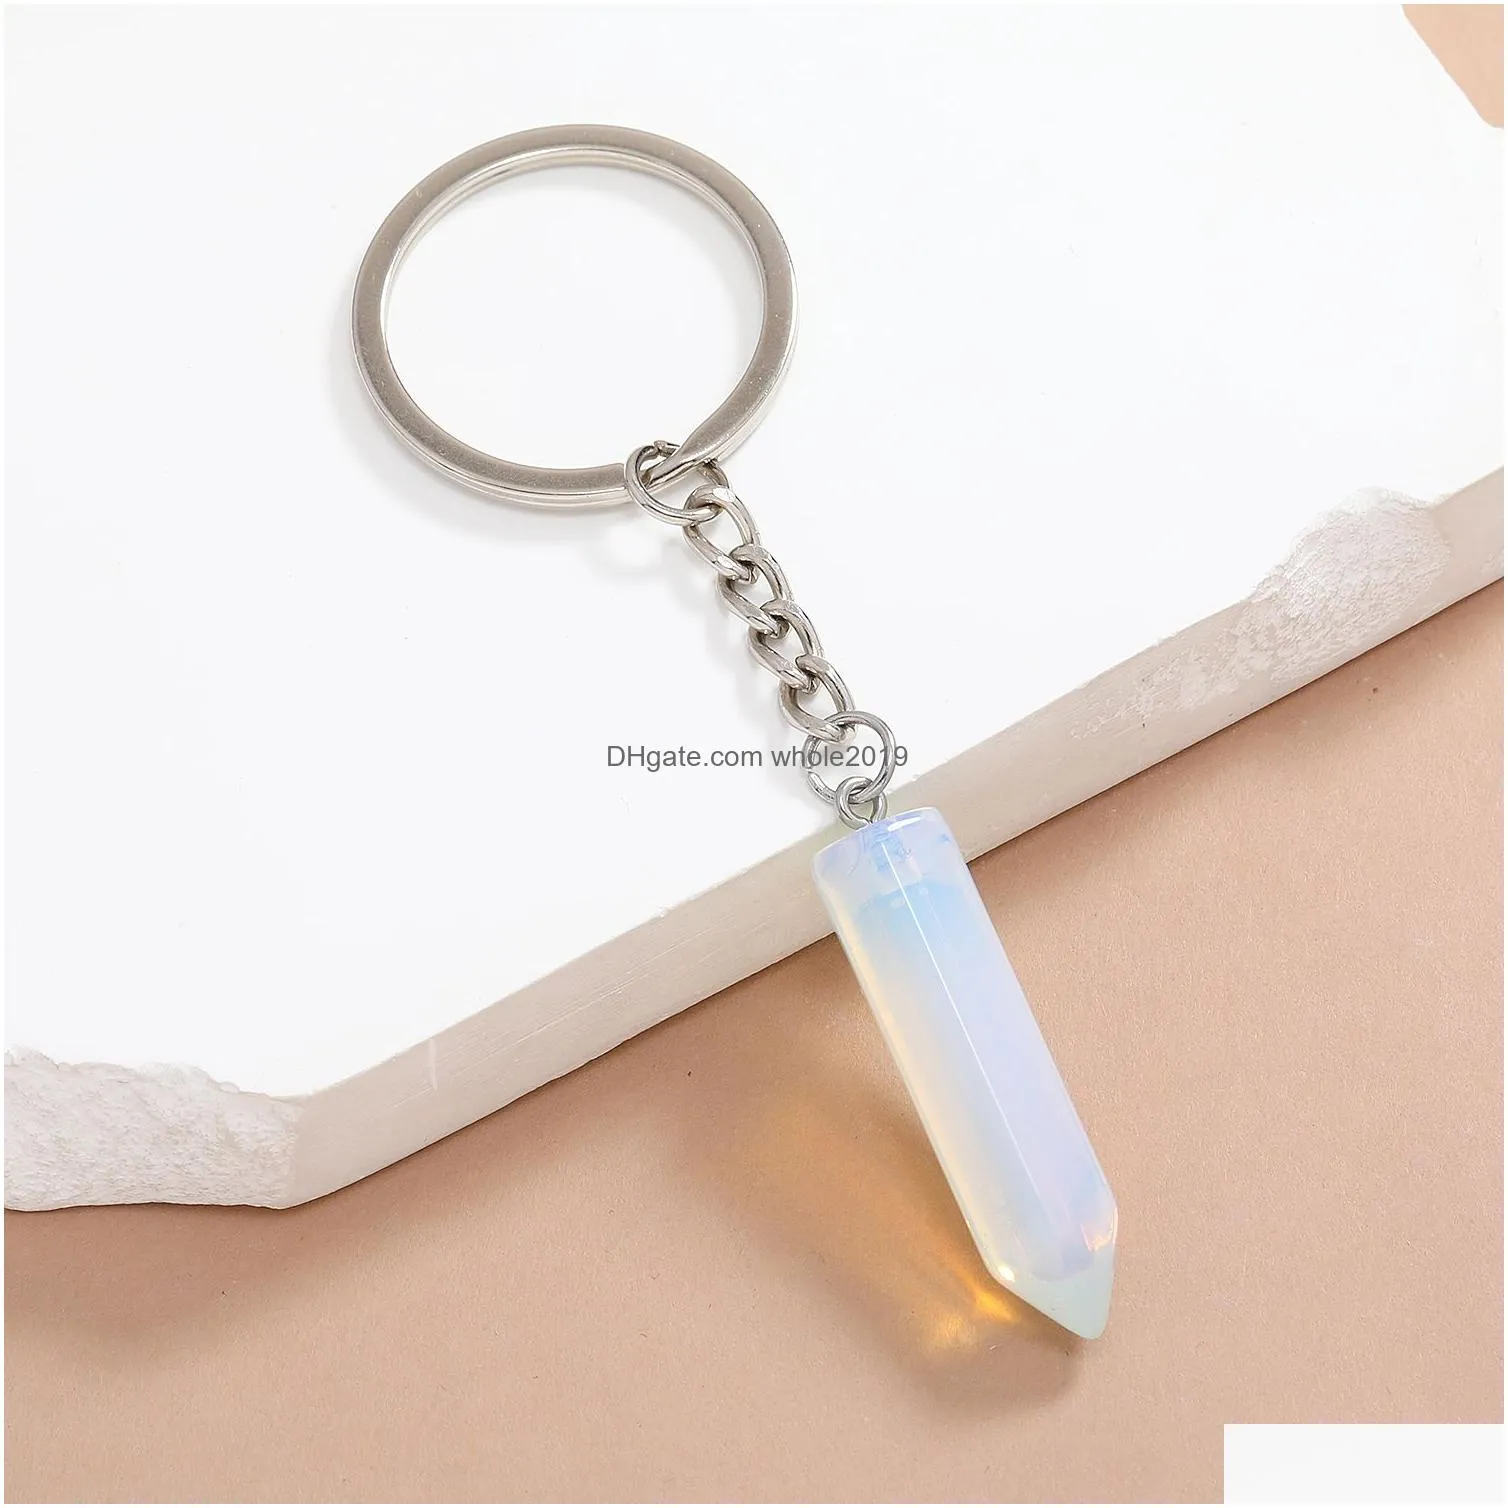 hexagonal column key ring natural stone opal crystal gem keychain for women men personality accessories